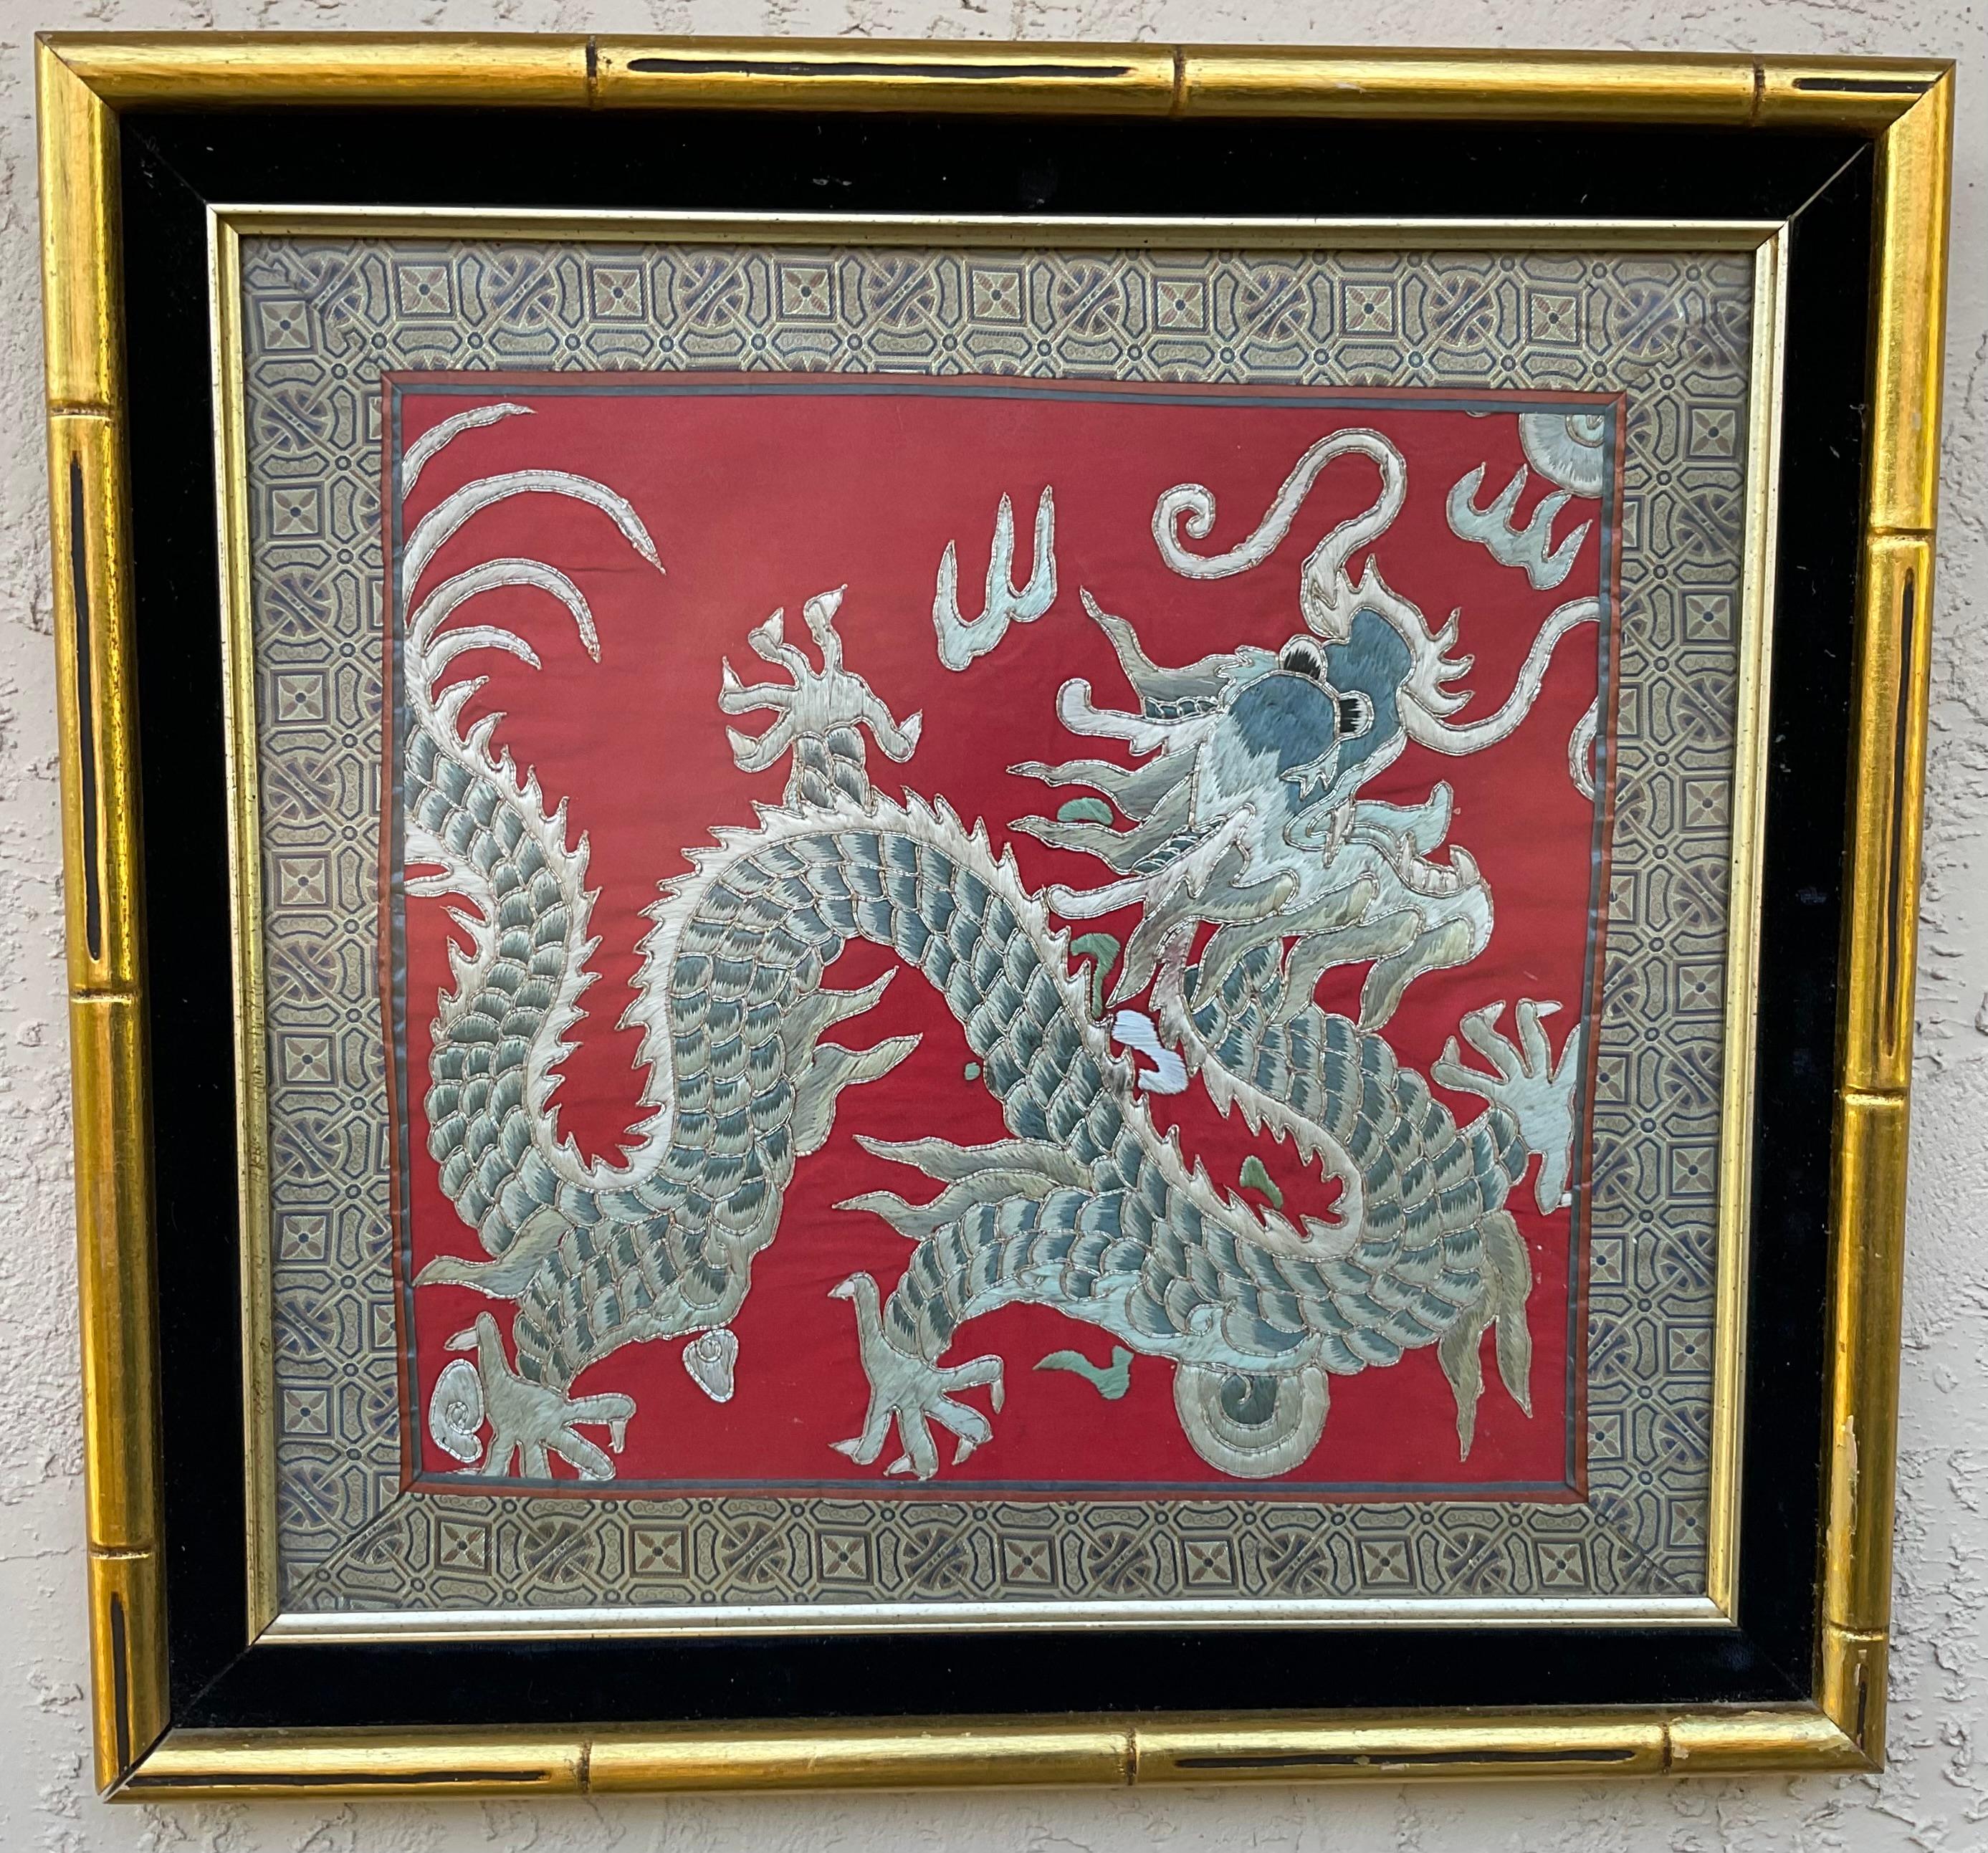 
Vintage  Chinese textile, with a finely detailed nicely dragon embroidery on  red silk background. Displayed in a contemporary gold wood frame with black velvet mat. 
Size of textile only “ 13”75 x 14”.75